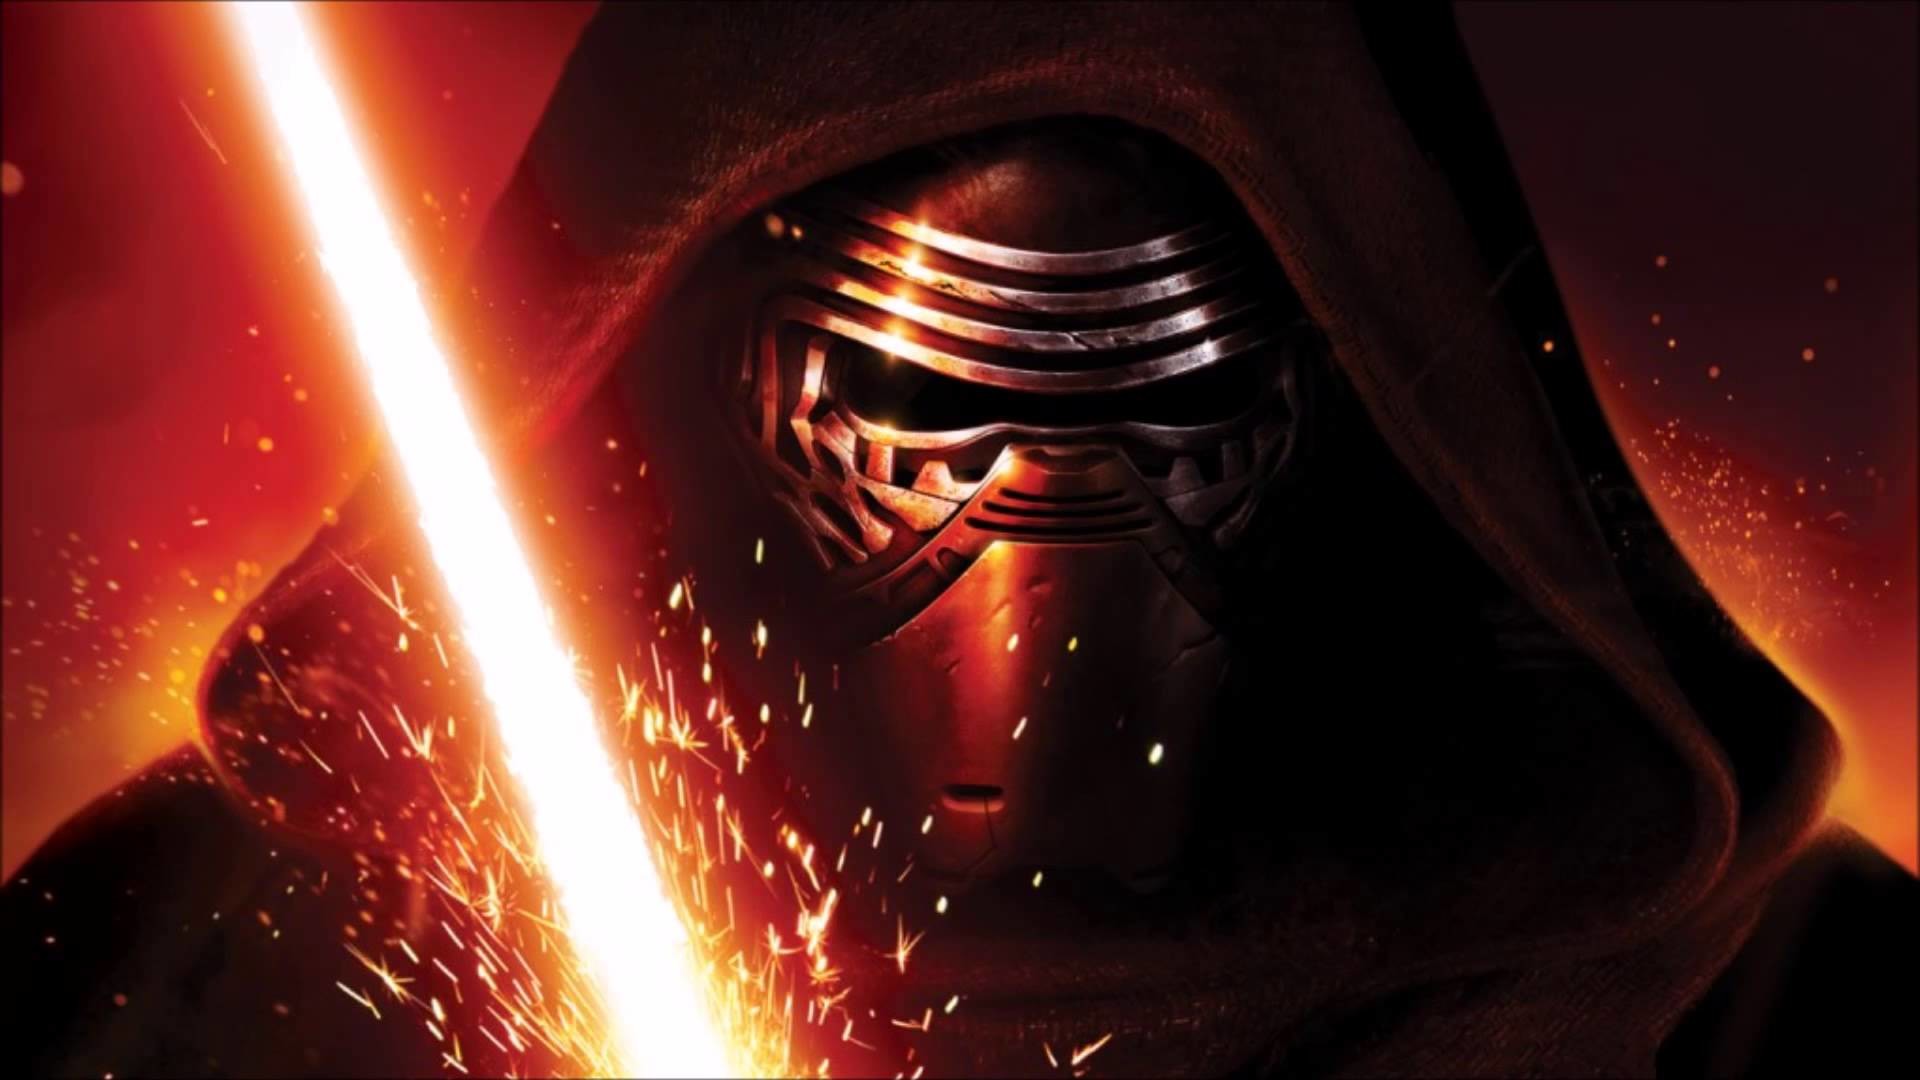 Star Wars: The Force Awakens – The Voice of Kylo Ren?